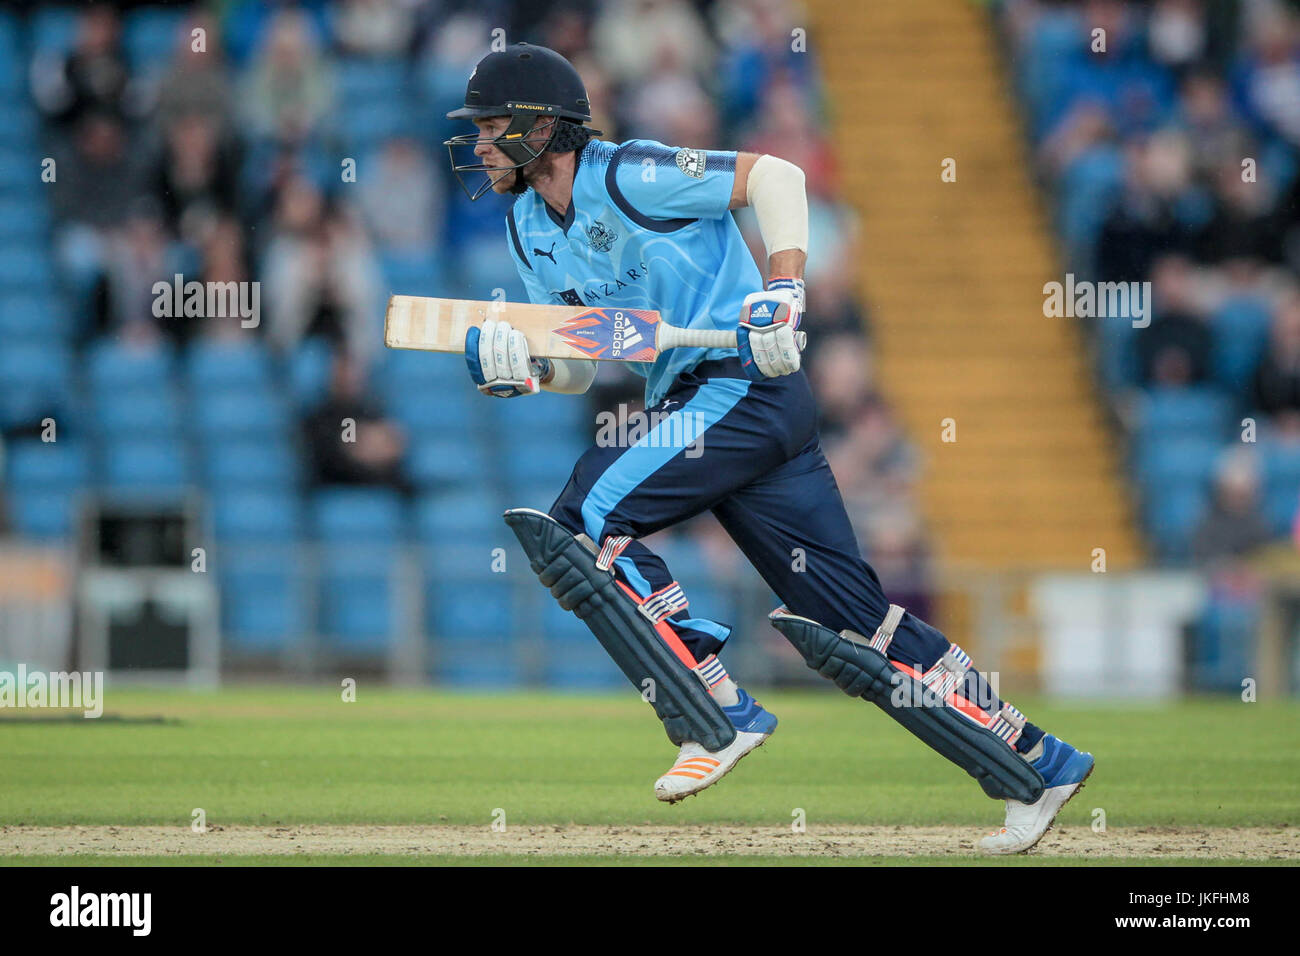 David Willey (Yorkshire CCC) runs between the wickets during the Natwest T20 Blast game between Yorkshire Vikings v Worcestershire Rapids on Sunday 23 July 2017. Photo by Mark P Doherty. Stock Photo